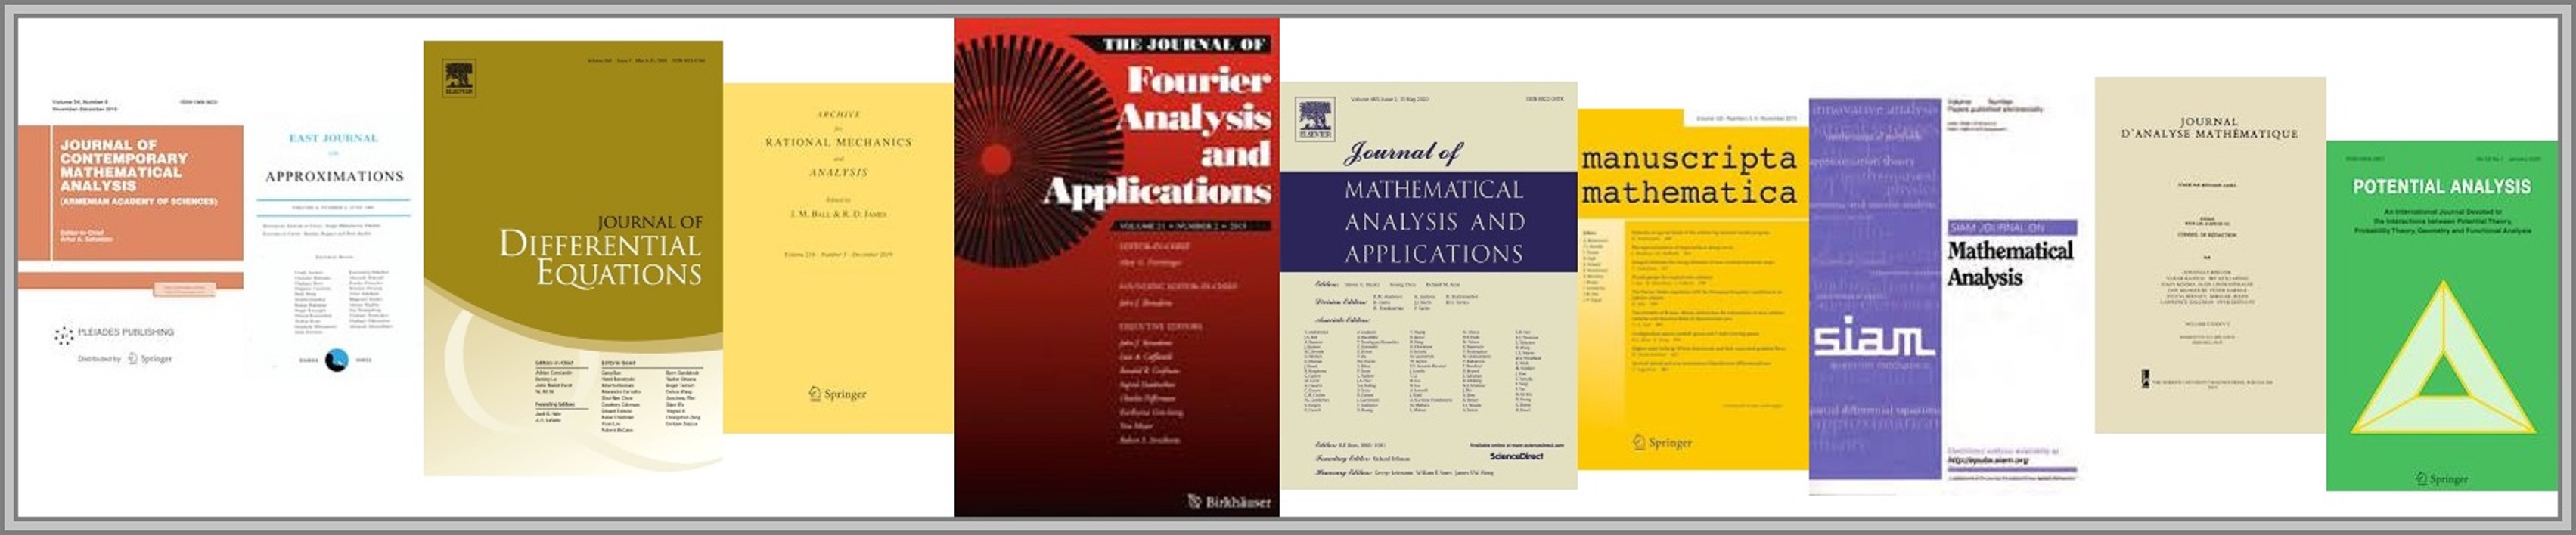 Covers of mathematical journals